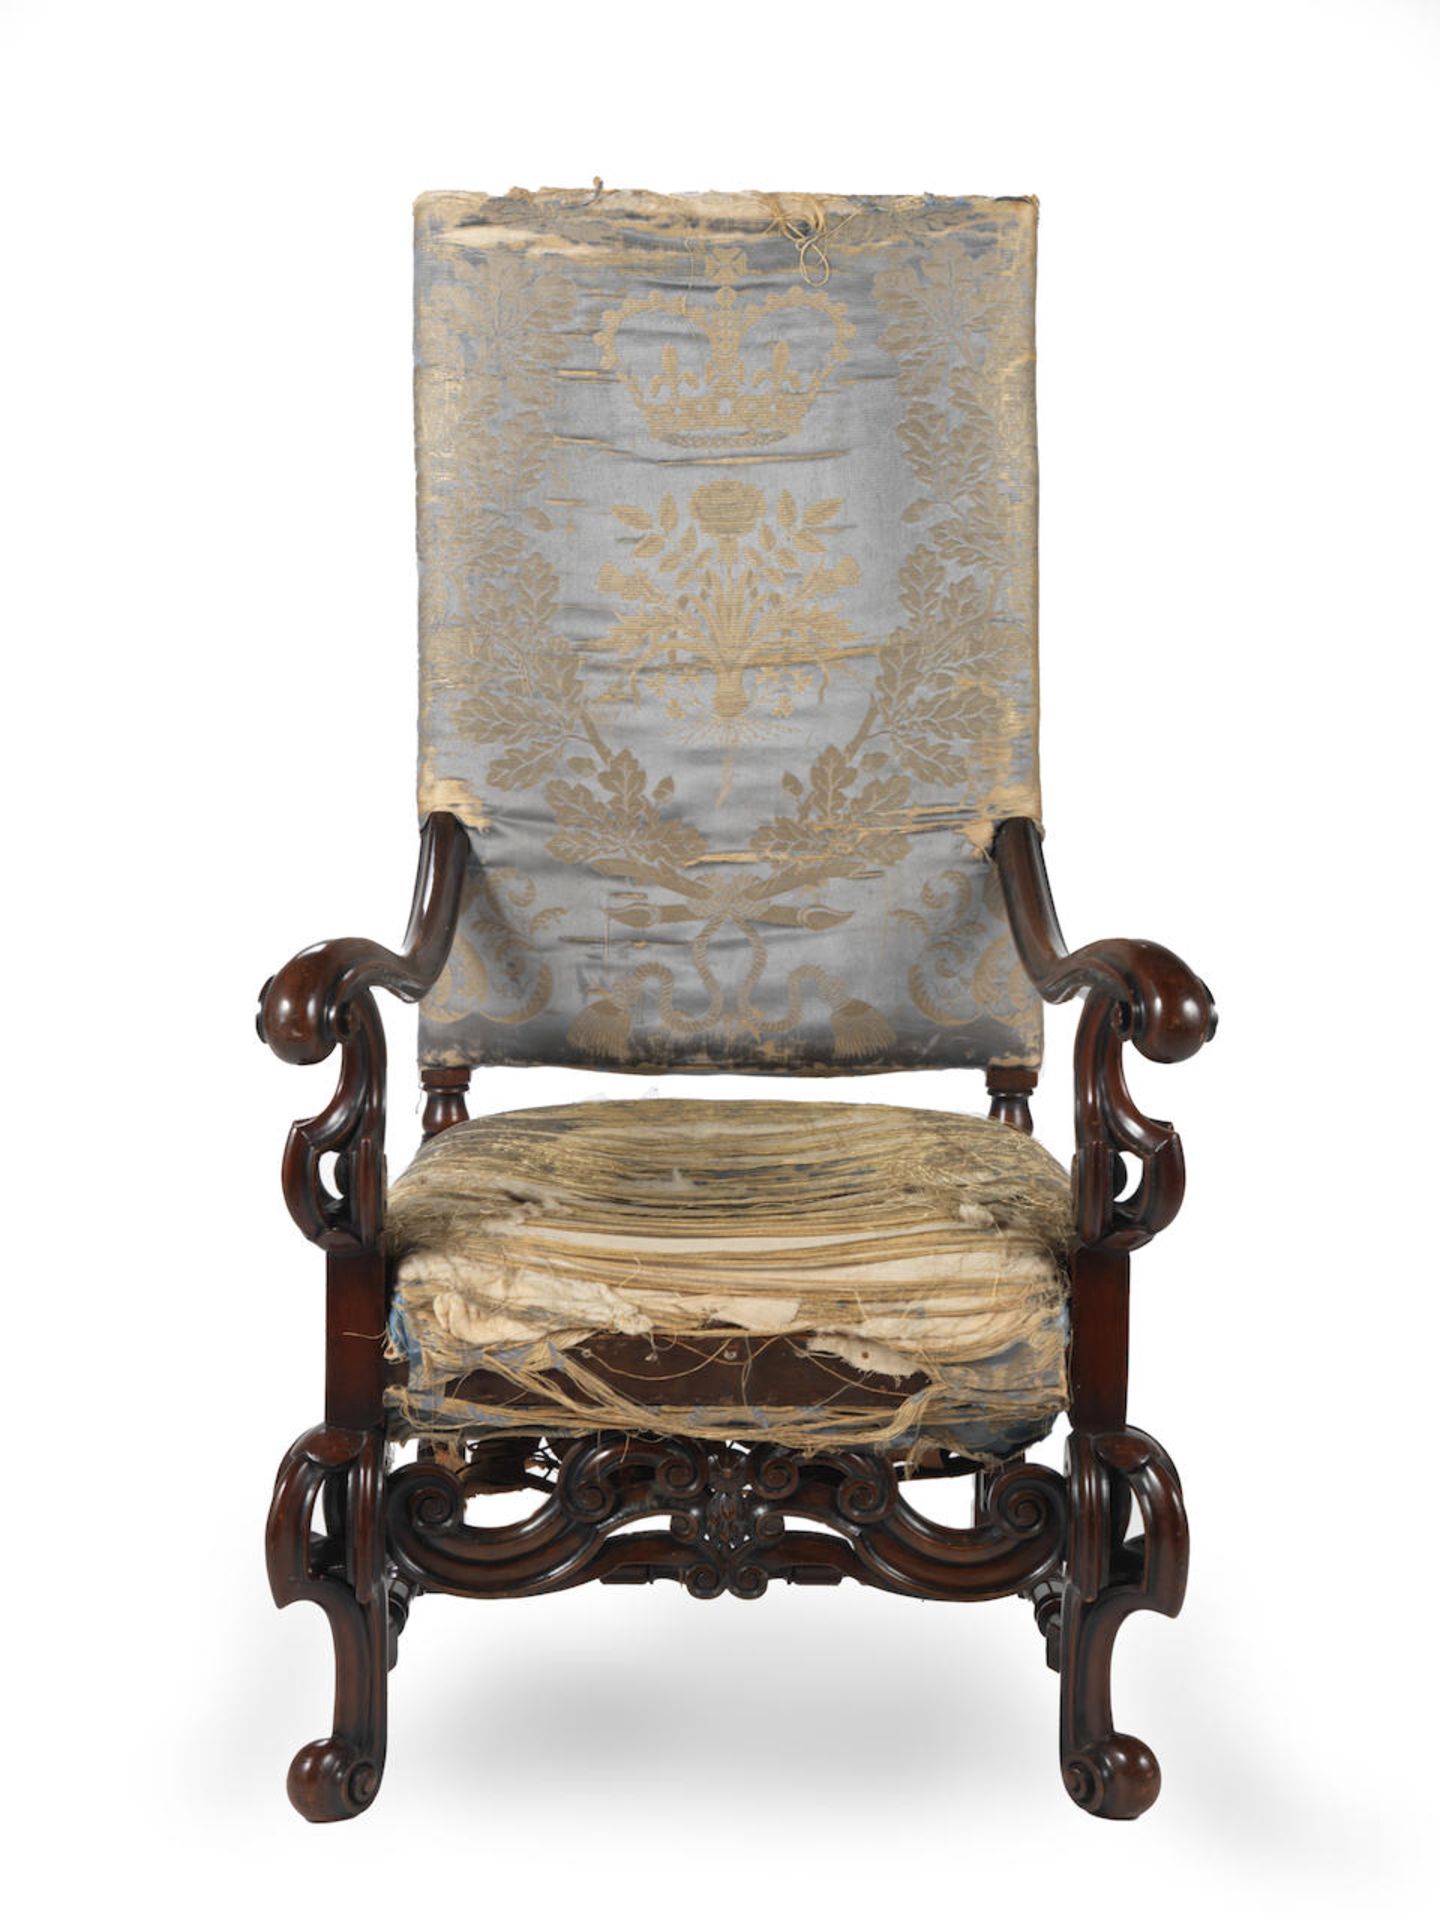 An Edwardian or early 20th century walnut armchair In the late 17th century style